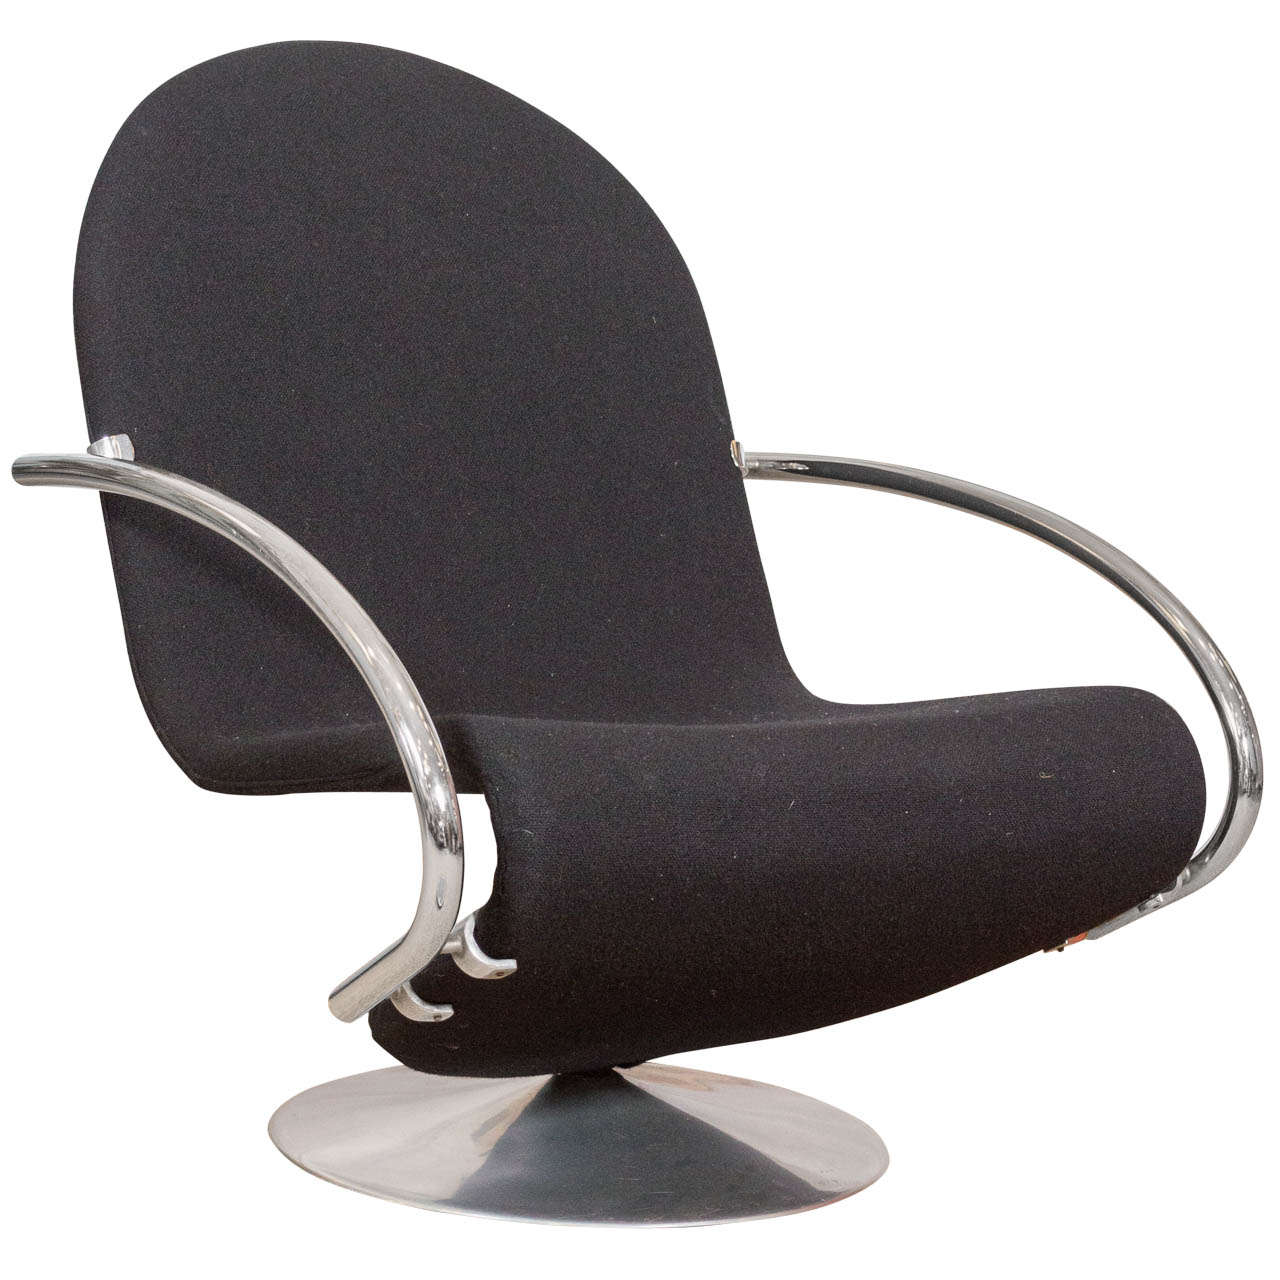 Verner Panton System 123 Model E Lounge Chair for Fritz Hansen at | verner panton 123 chair, hansen system 123, verner lounge chair